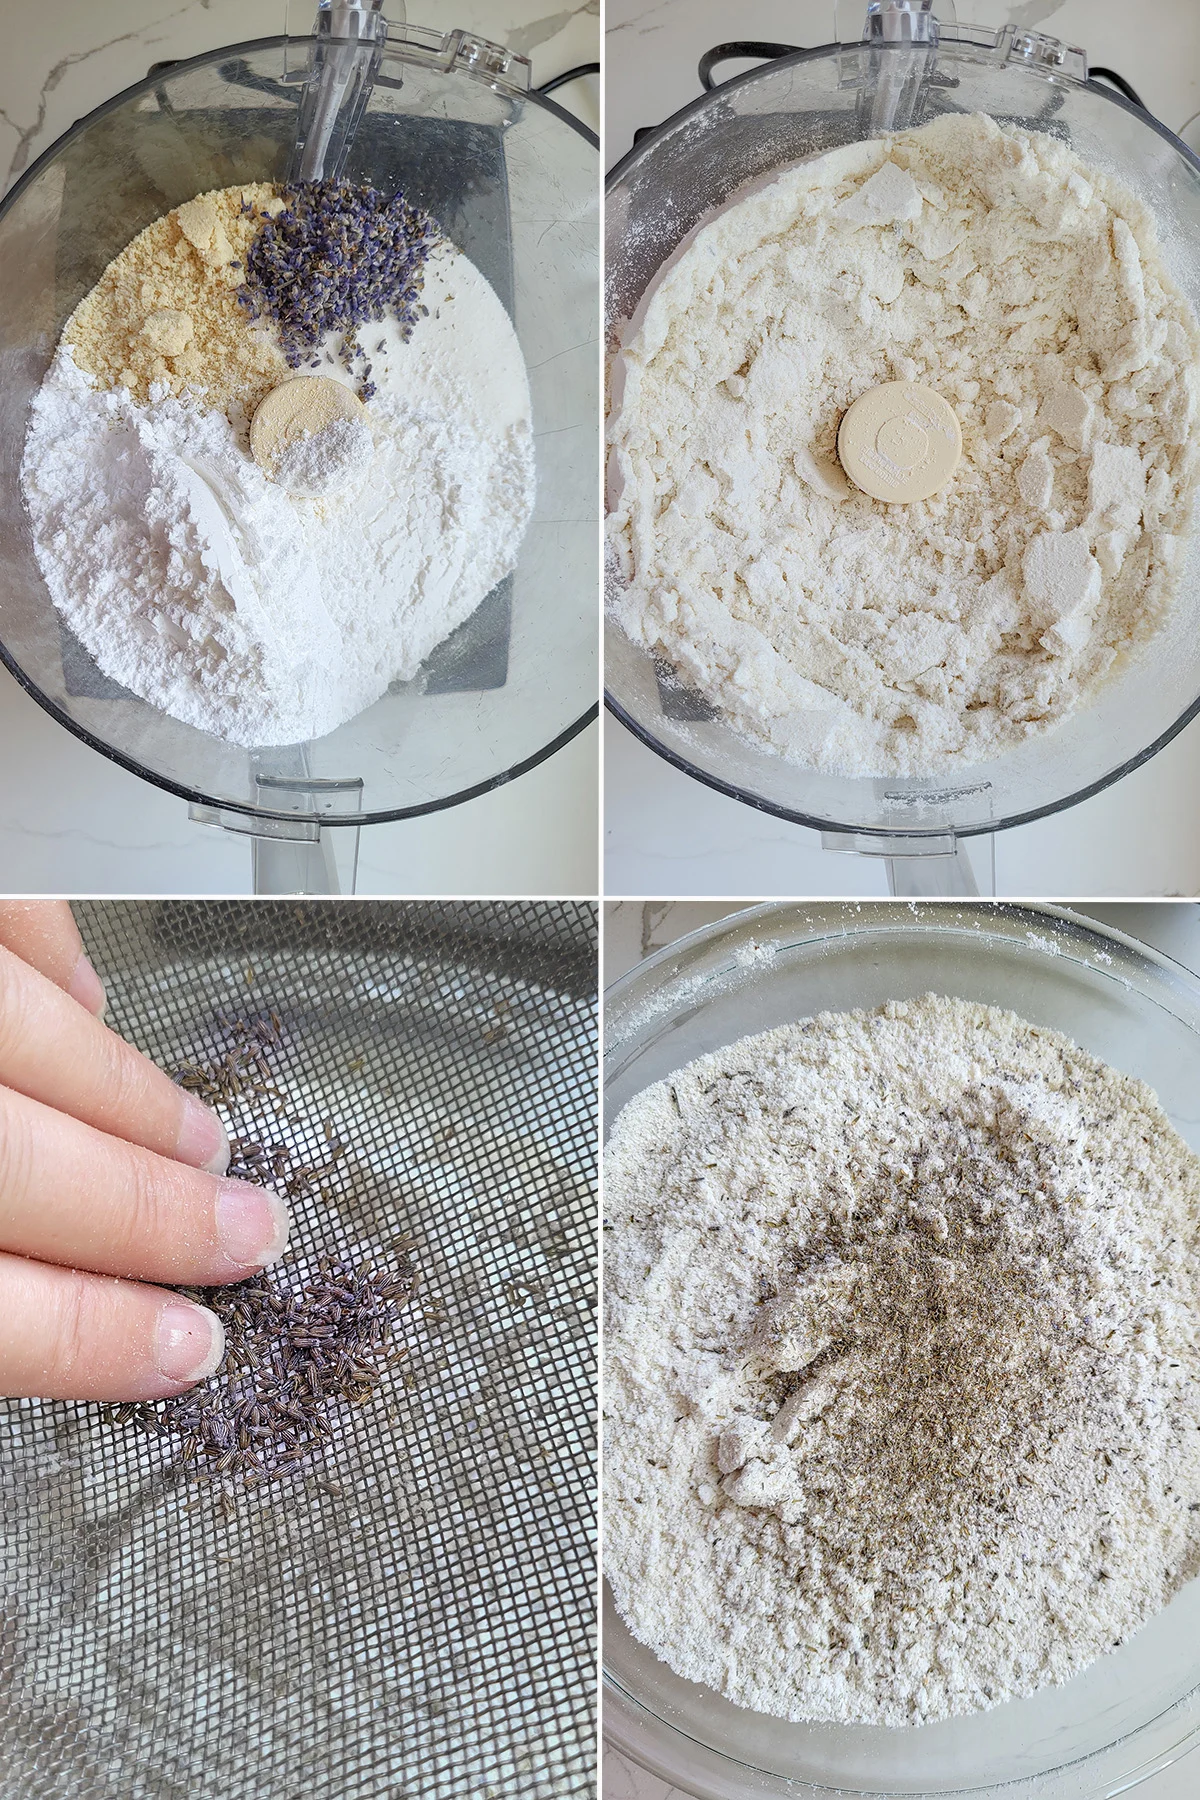 A food processor with ingredients for lavender macarons in the bowl. Sifting ingredients.